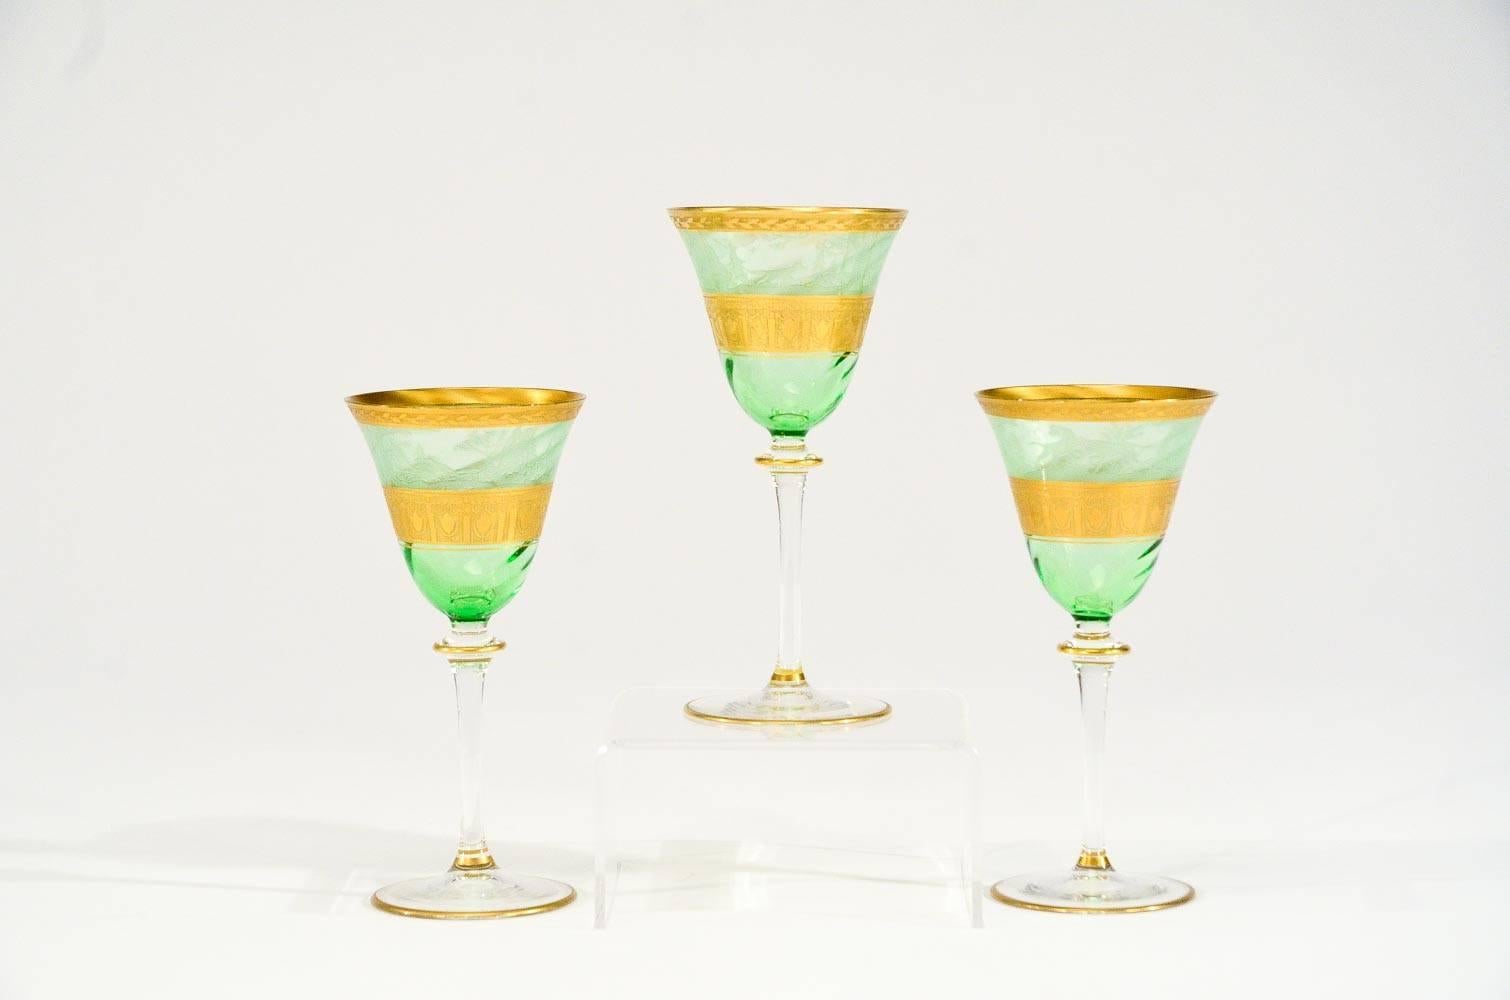 A rare and beautifully decorated set of 6 Moser hand blown goblets, perfect for your favorite dessert wine, port or cocktail. The apple green optic swirl coupe is decorated with a bands of acid etched gold and the foot is trimmed in gold,